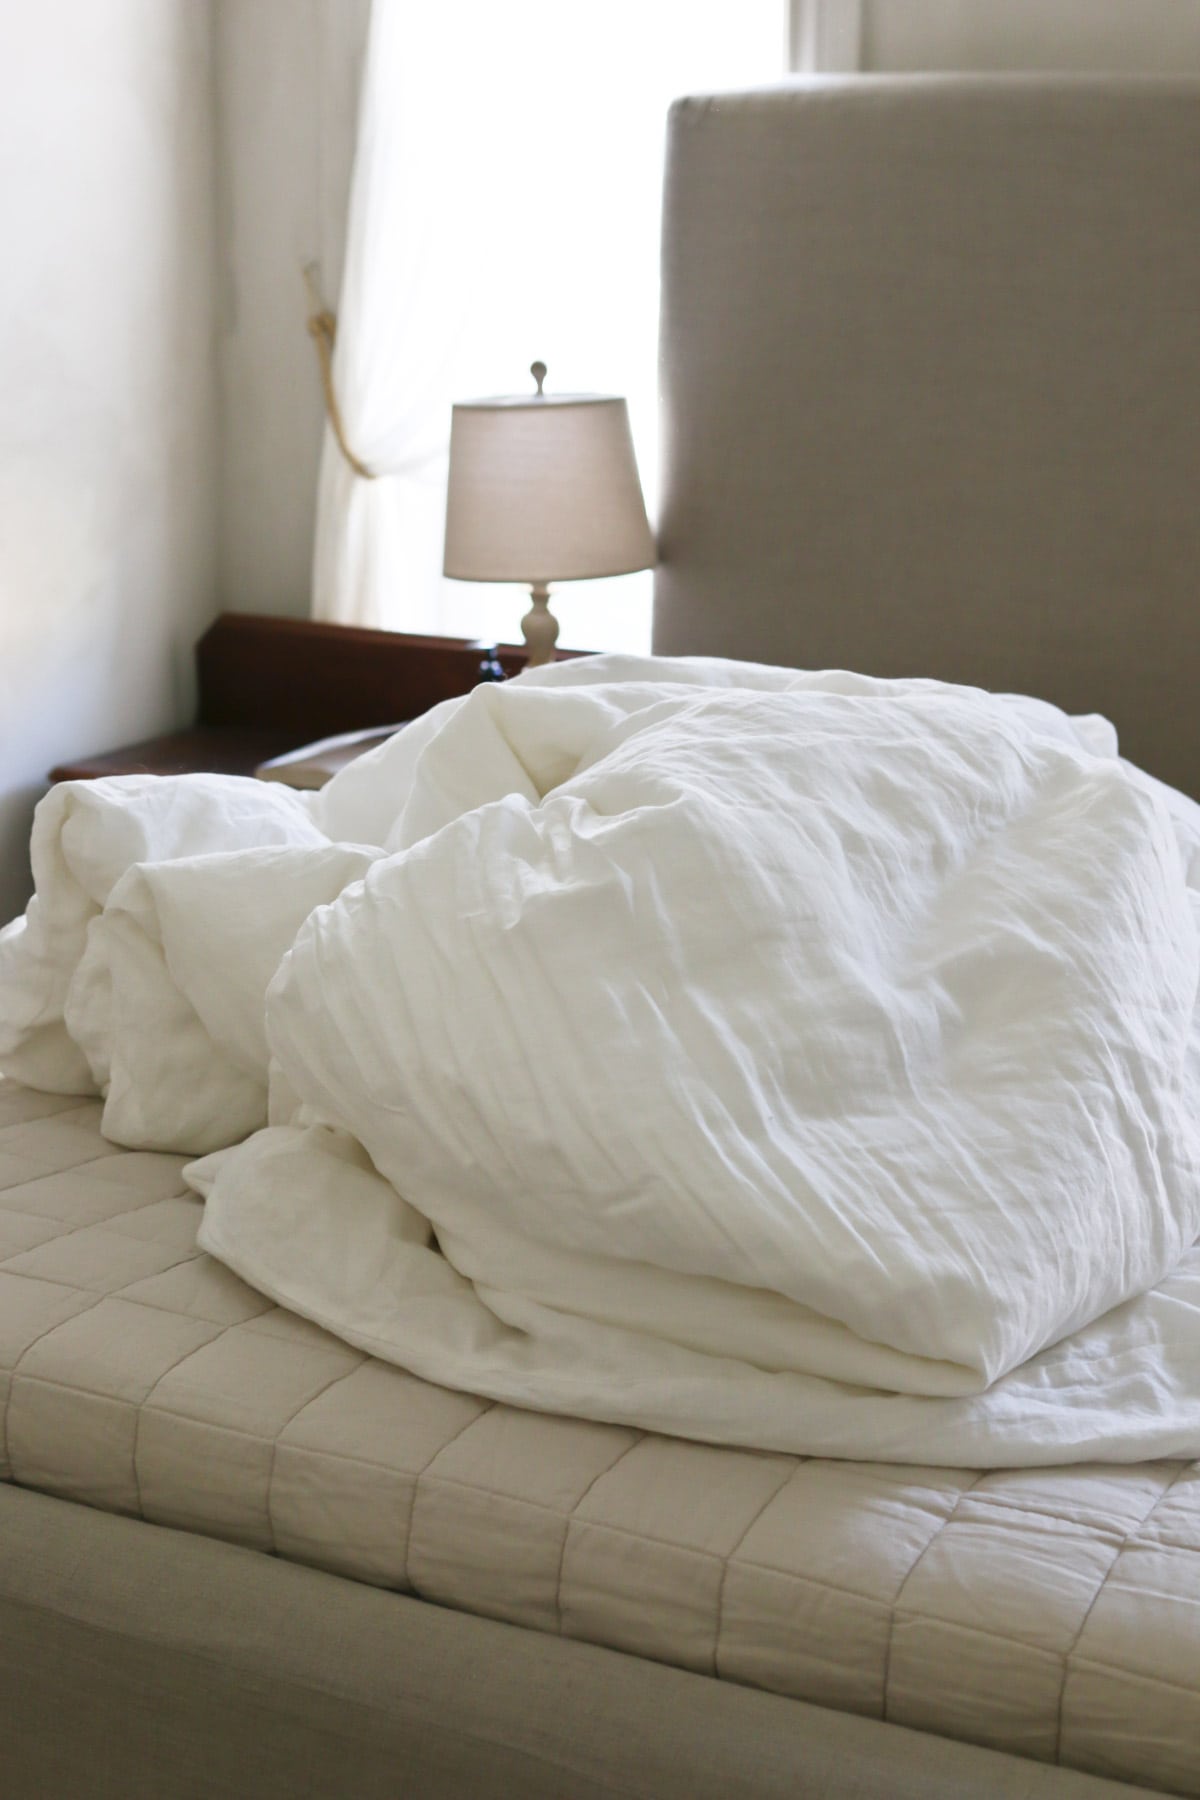 where to get a linen duvet cover for your bed